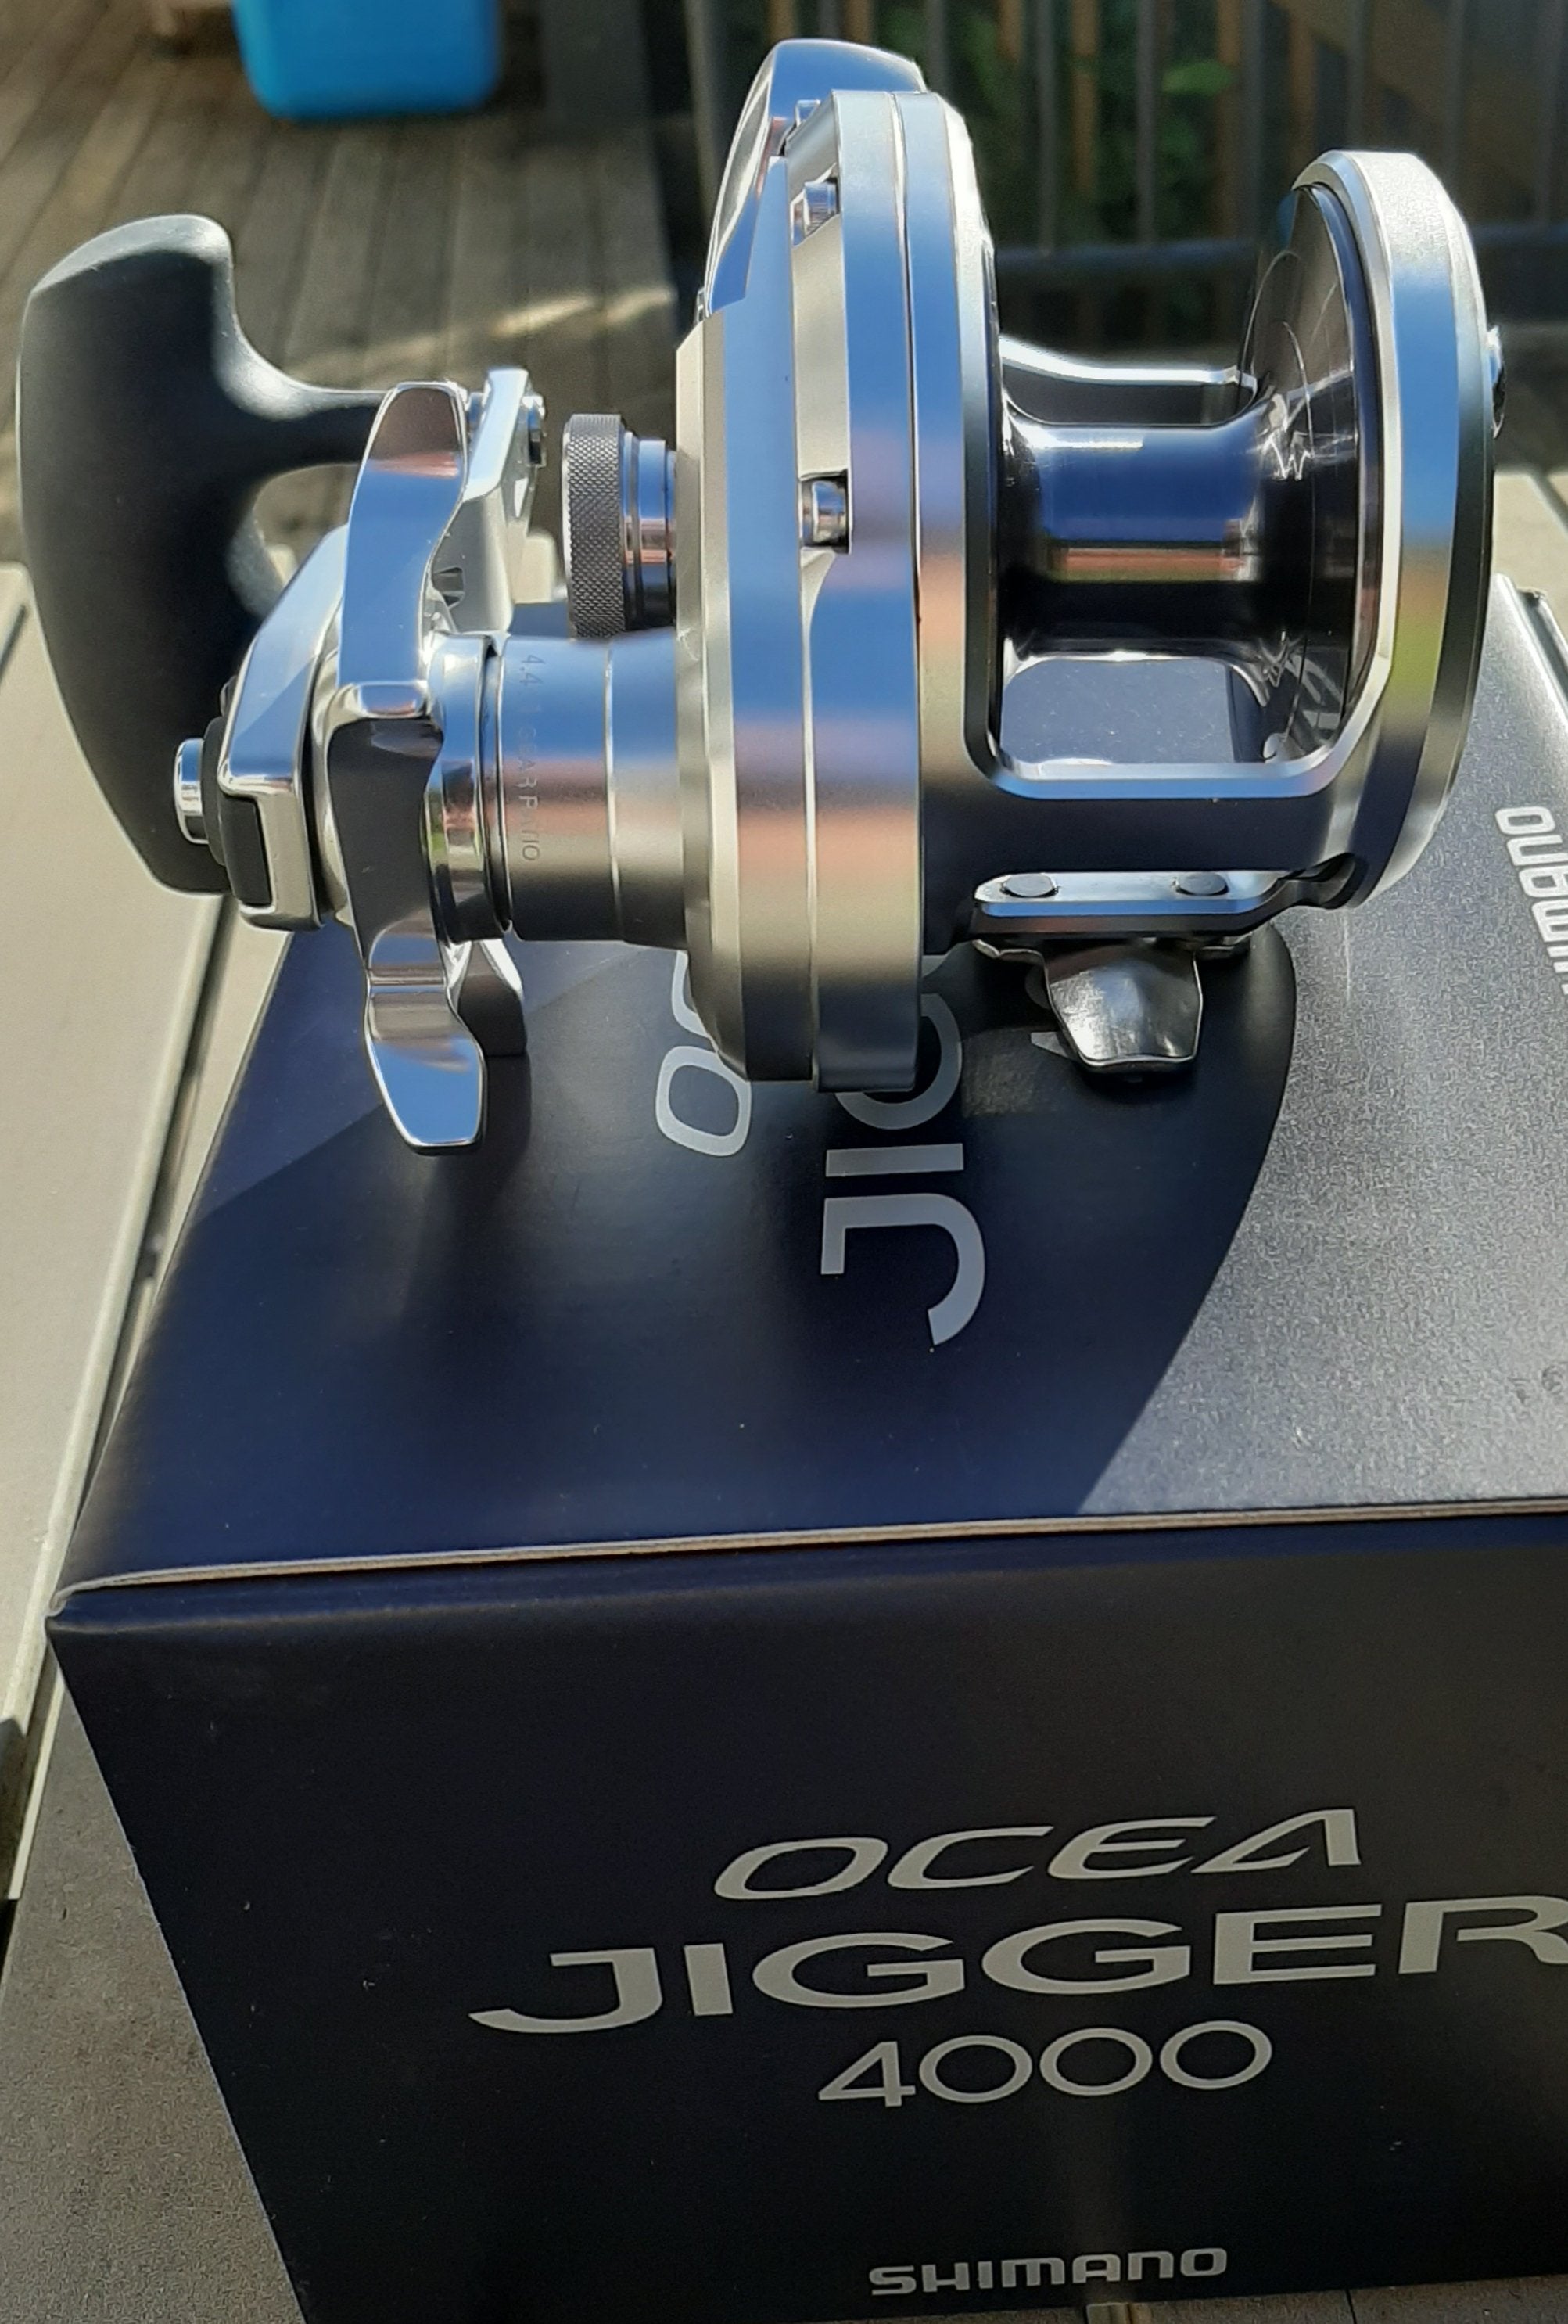 Shimano JP is now accepting orders for 2019 Ocea F 3000 and 4000PG